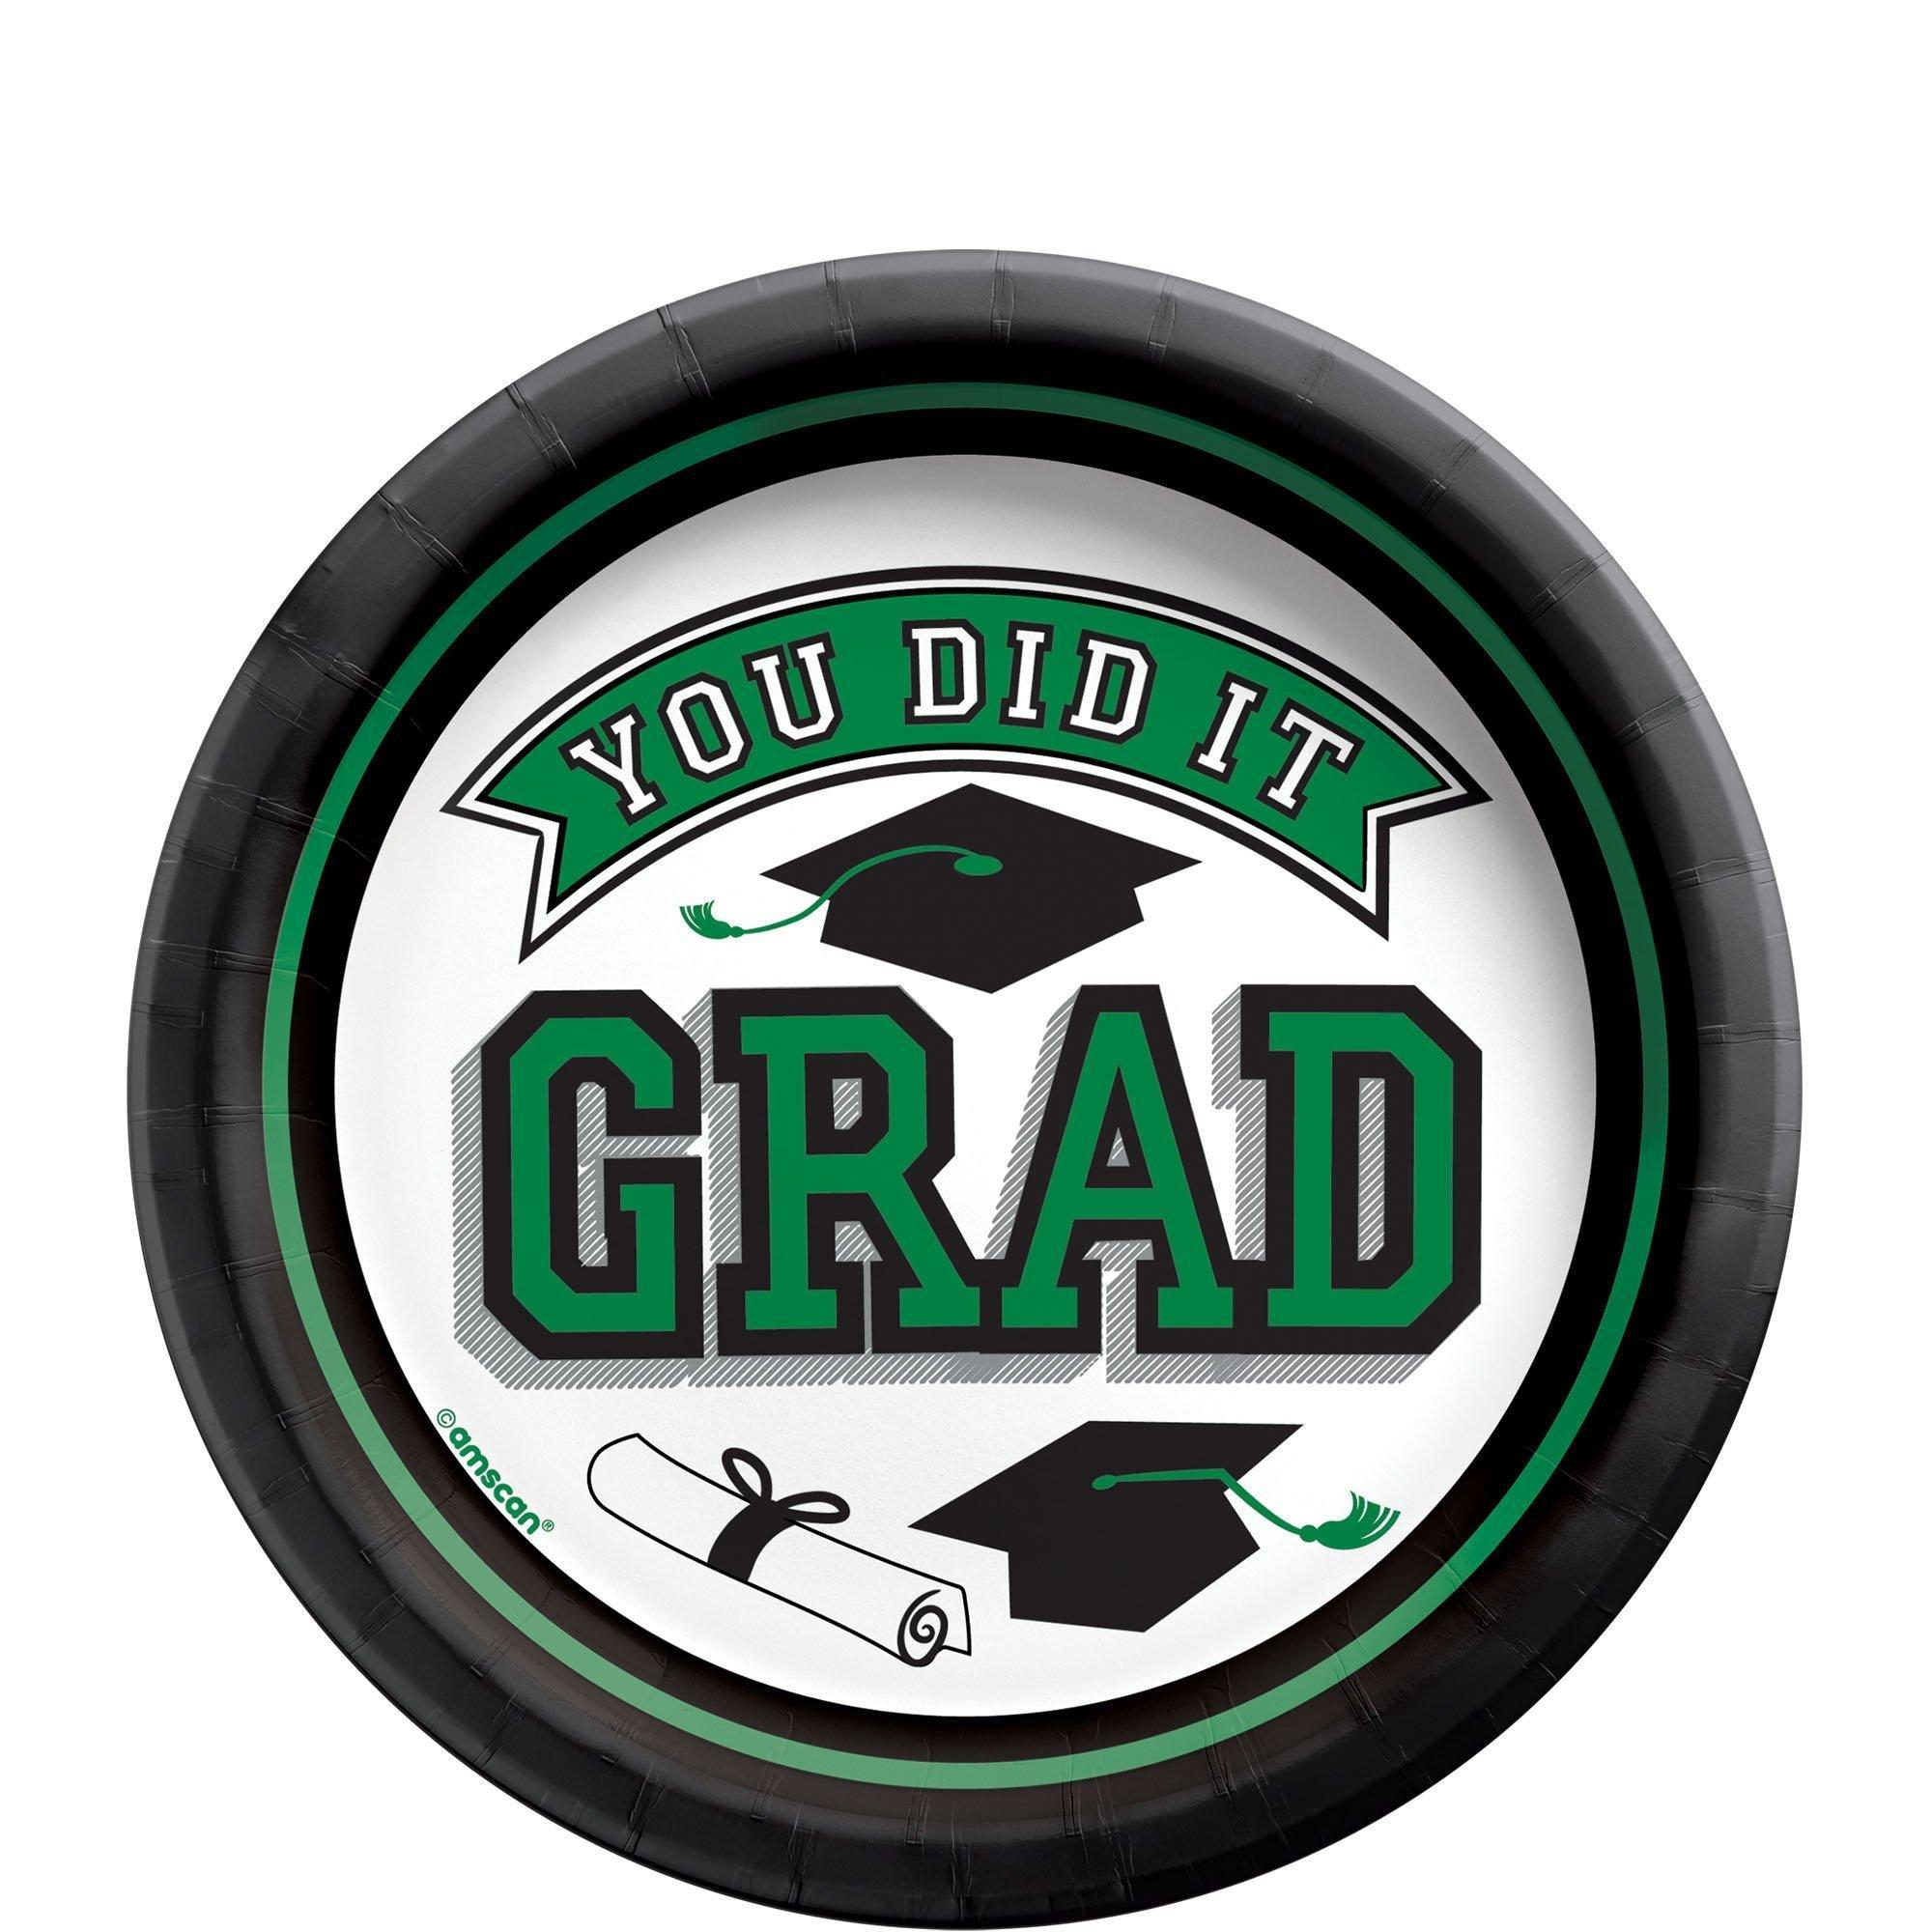 Graduation Party Supplies Kit for 60 with Decorations, Banners, Plates, Napkins, Cups - Green Congrats Grad